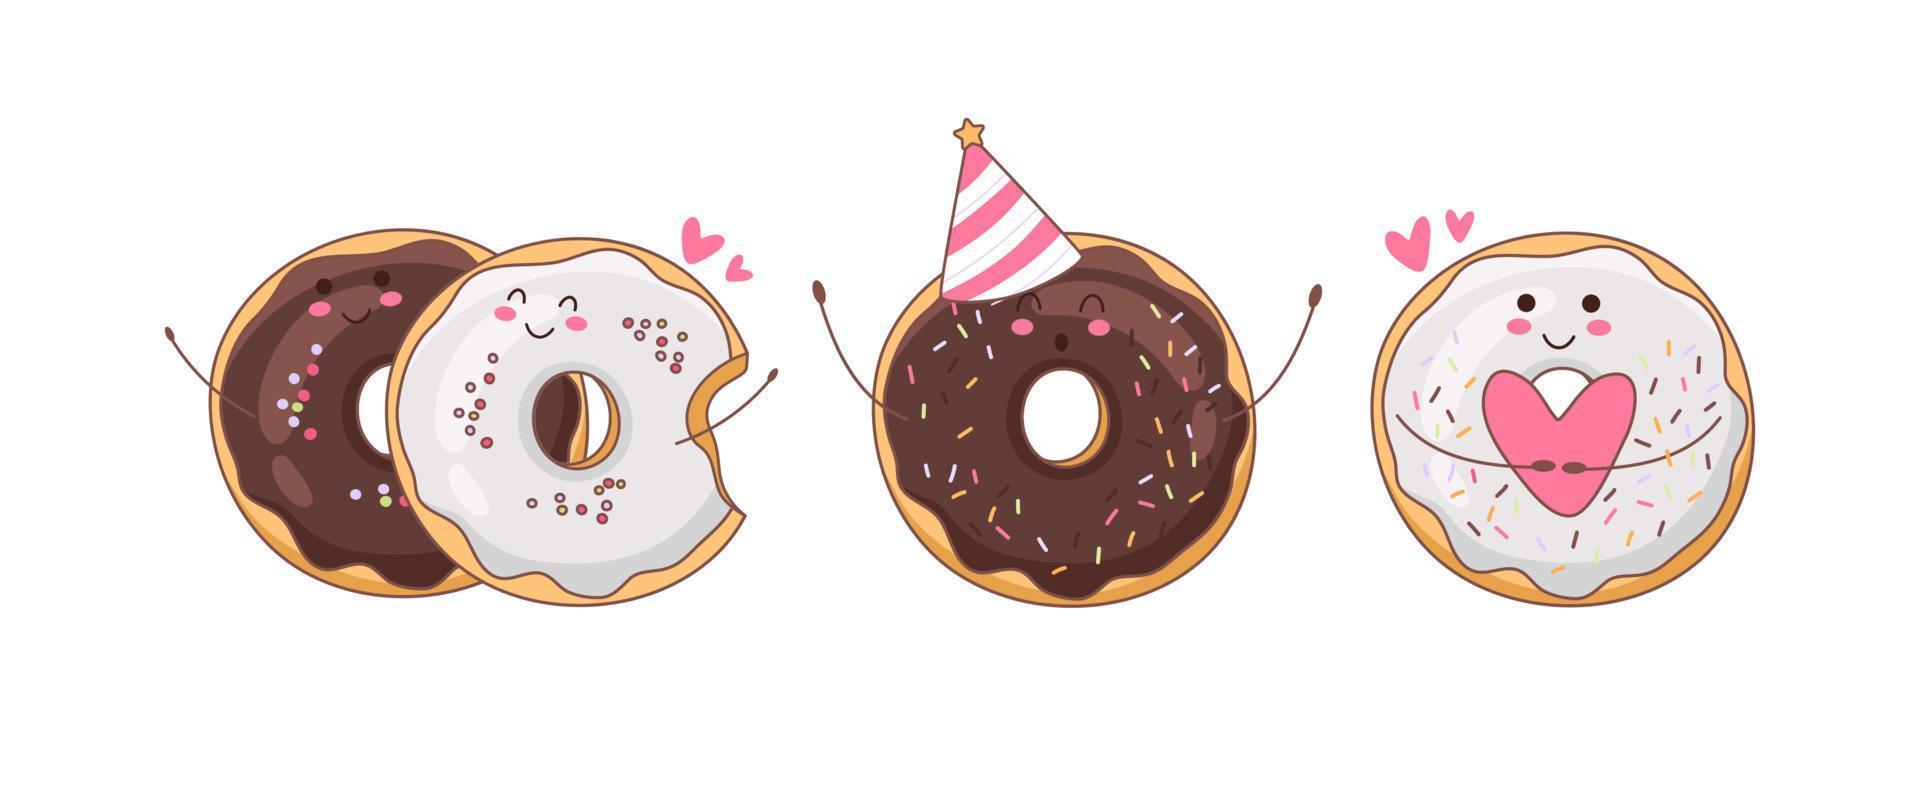 Set of colorful donuts. Vector illustration of a donut character in doodle style. Perfect for used for cafe, bakery or manufacturer's website. Ideal for stickers, postcards, banners or posters.